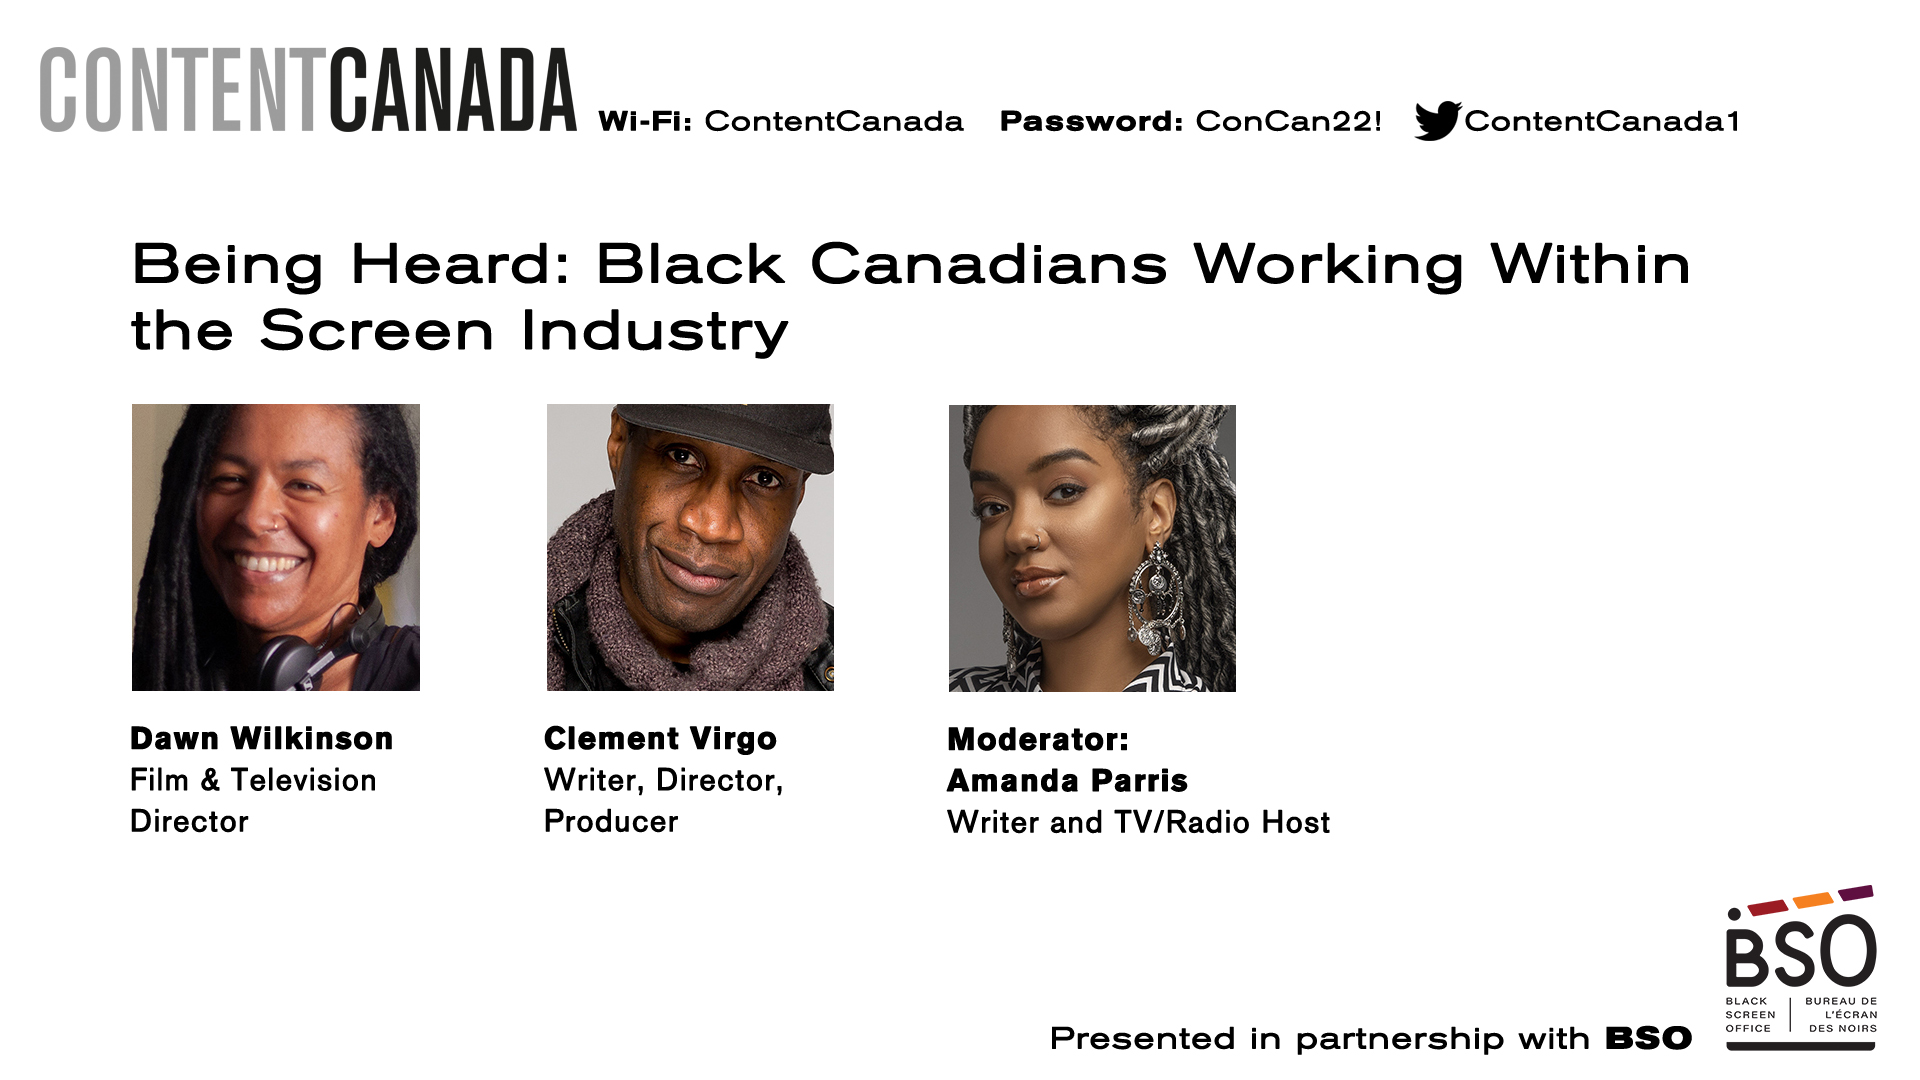 Being Heard: Black Canadians Working Within the Screen Industry